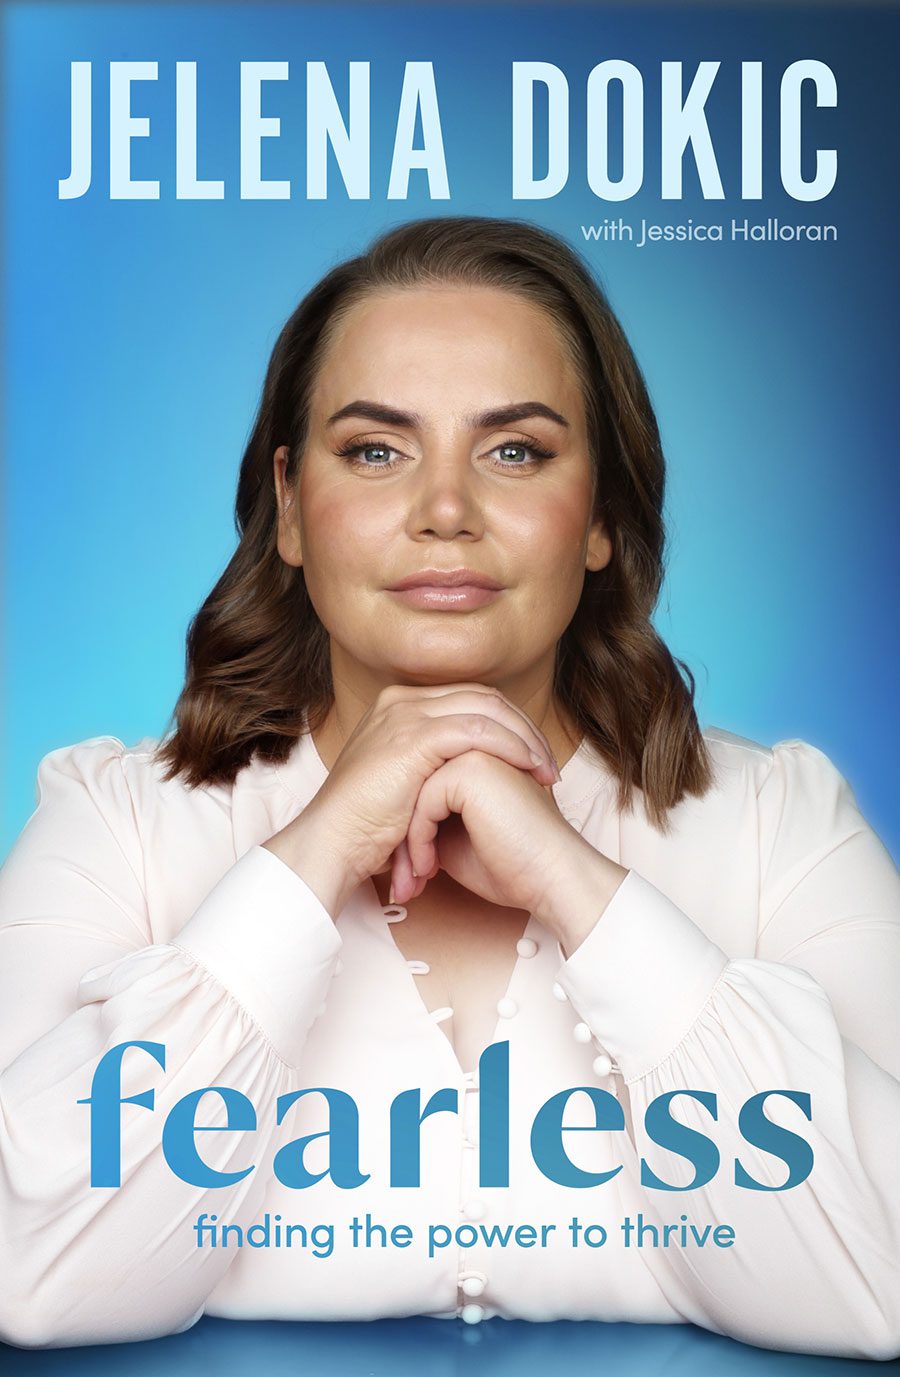 Fearless - finding the power to thrive by Jelena Dokic book cover